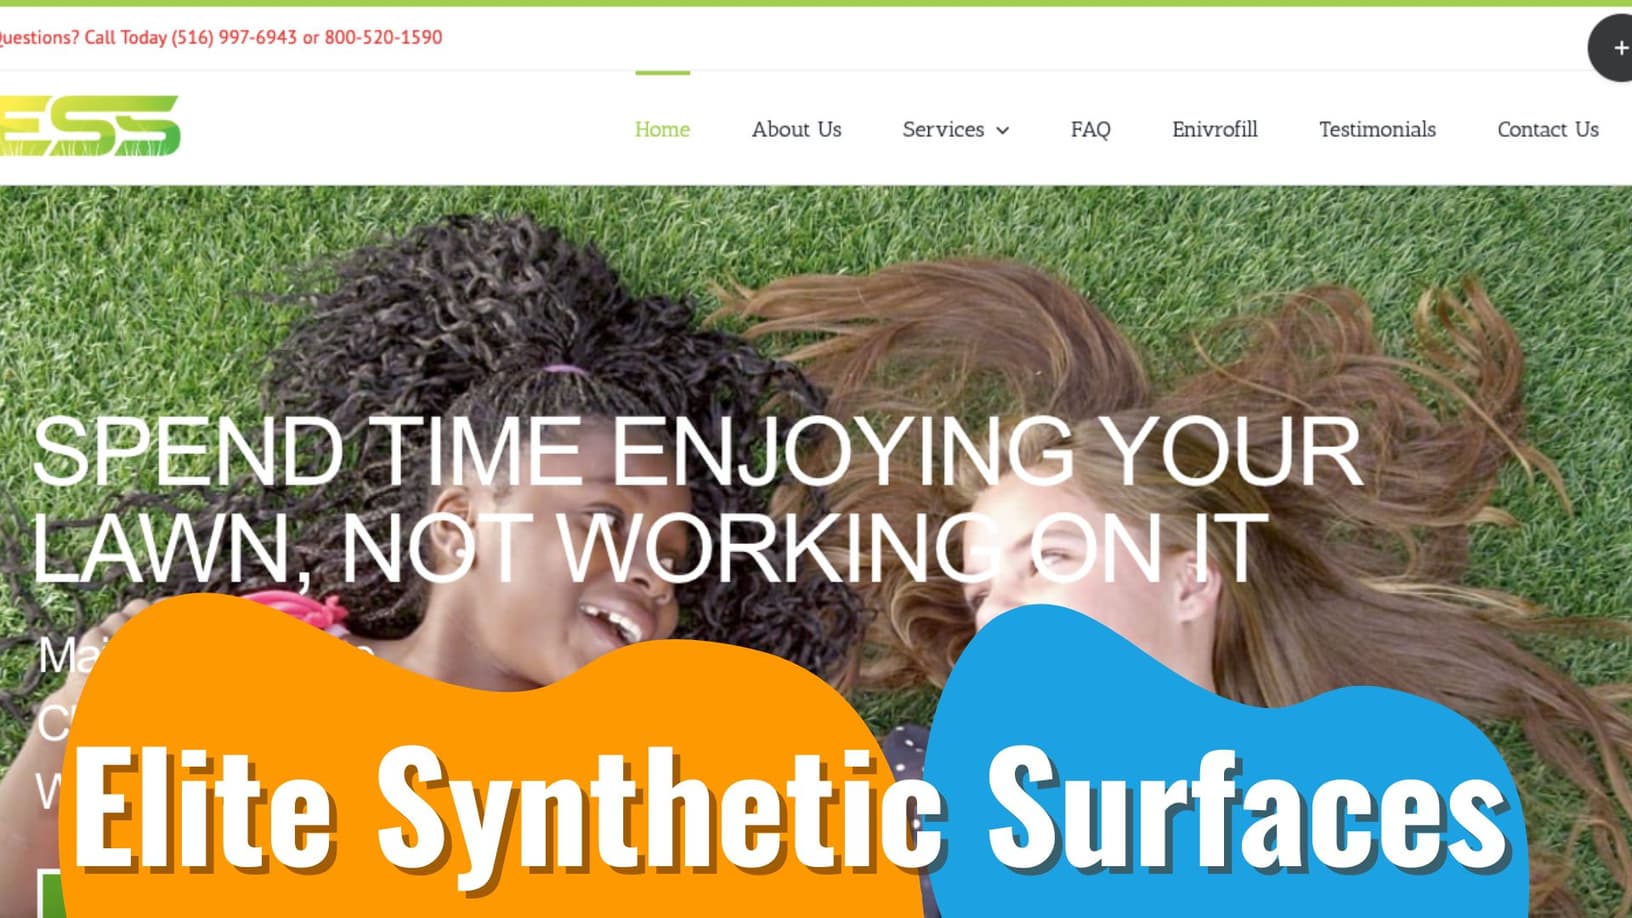 Elite Synthetic Surfaces New York City